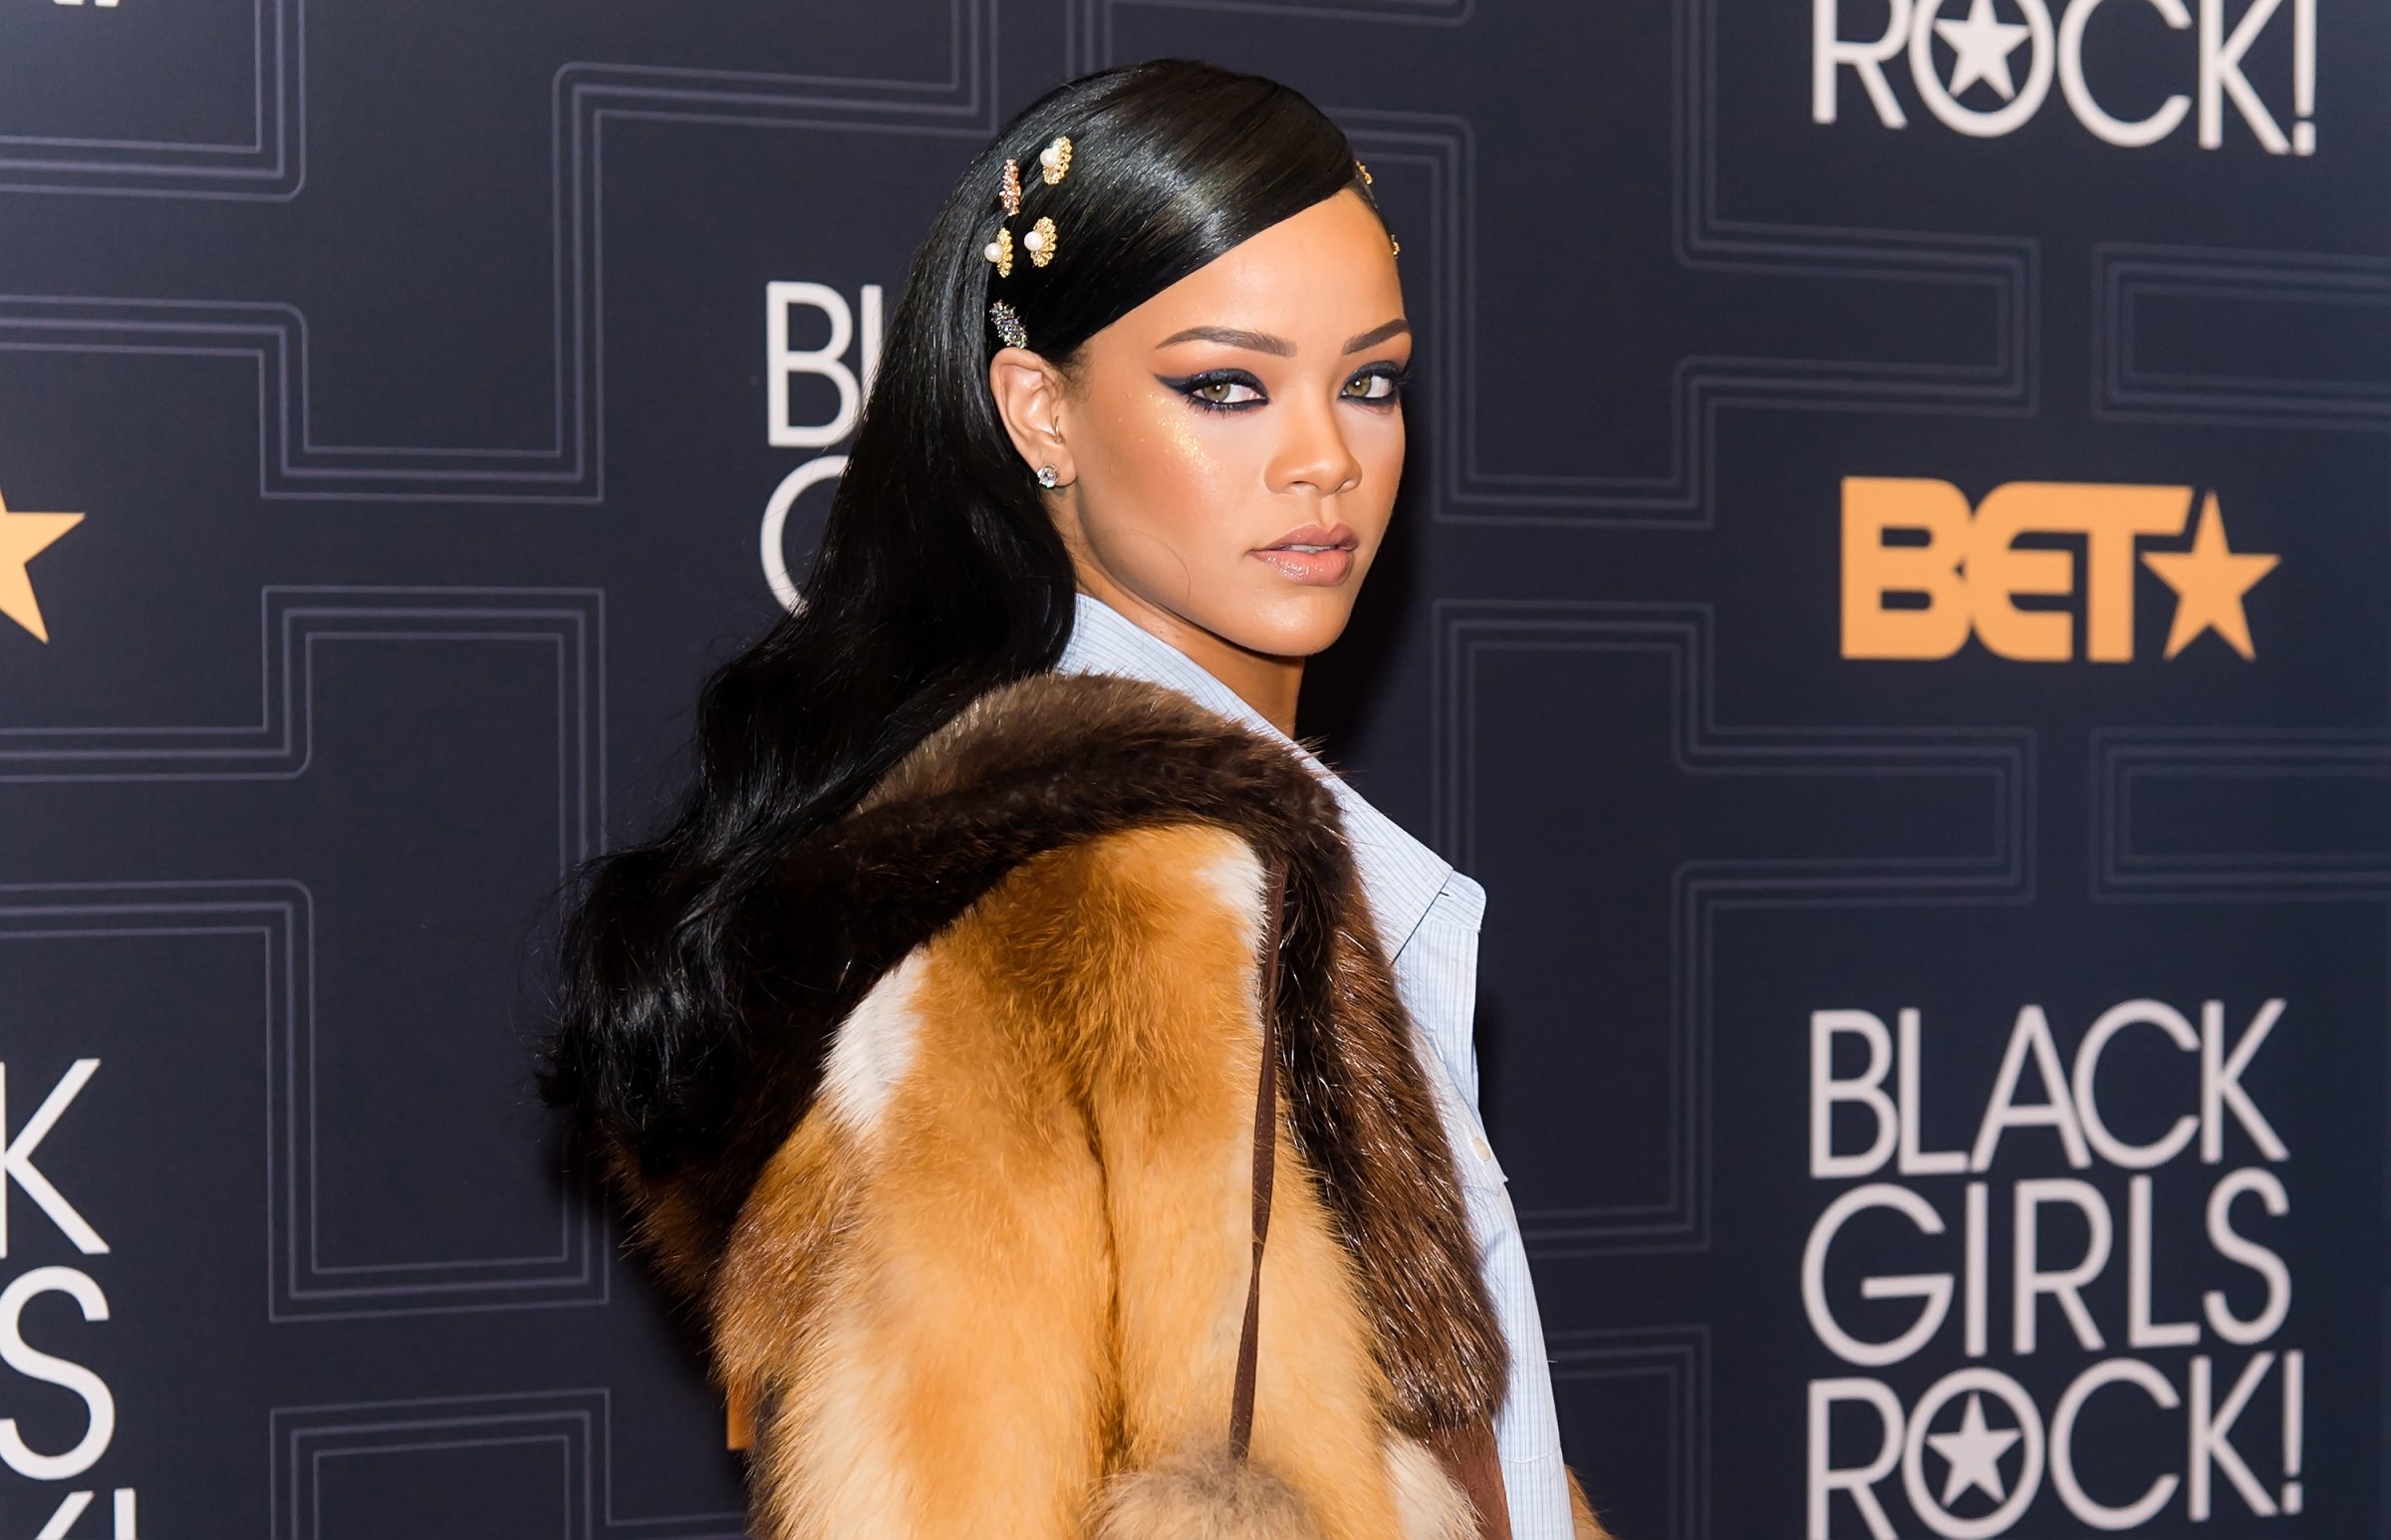 Singer/songwriter and Rock Star Award recipient Rihanna attends BET Black Girls Rock! 2016 at New Jersey Performing Arts Center on April 1, 2016 in Newark, New Jersey.